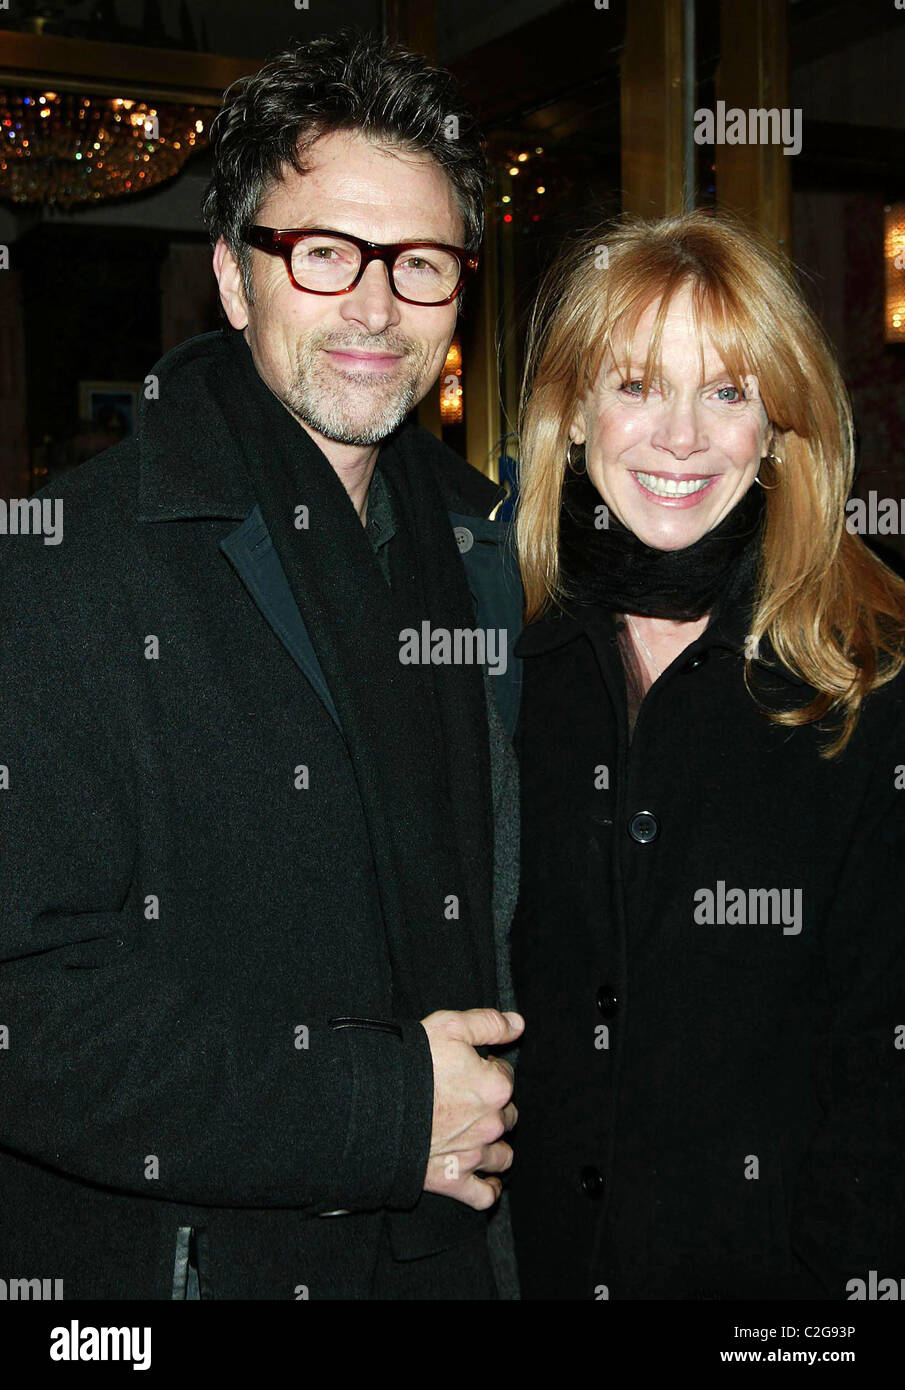 Tim Daly & Amy Van Nostrand  Opening night performance of 'August: Osage County' at the Imperial Theatre - Arrivals New York Stock Photo